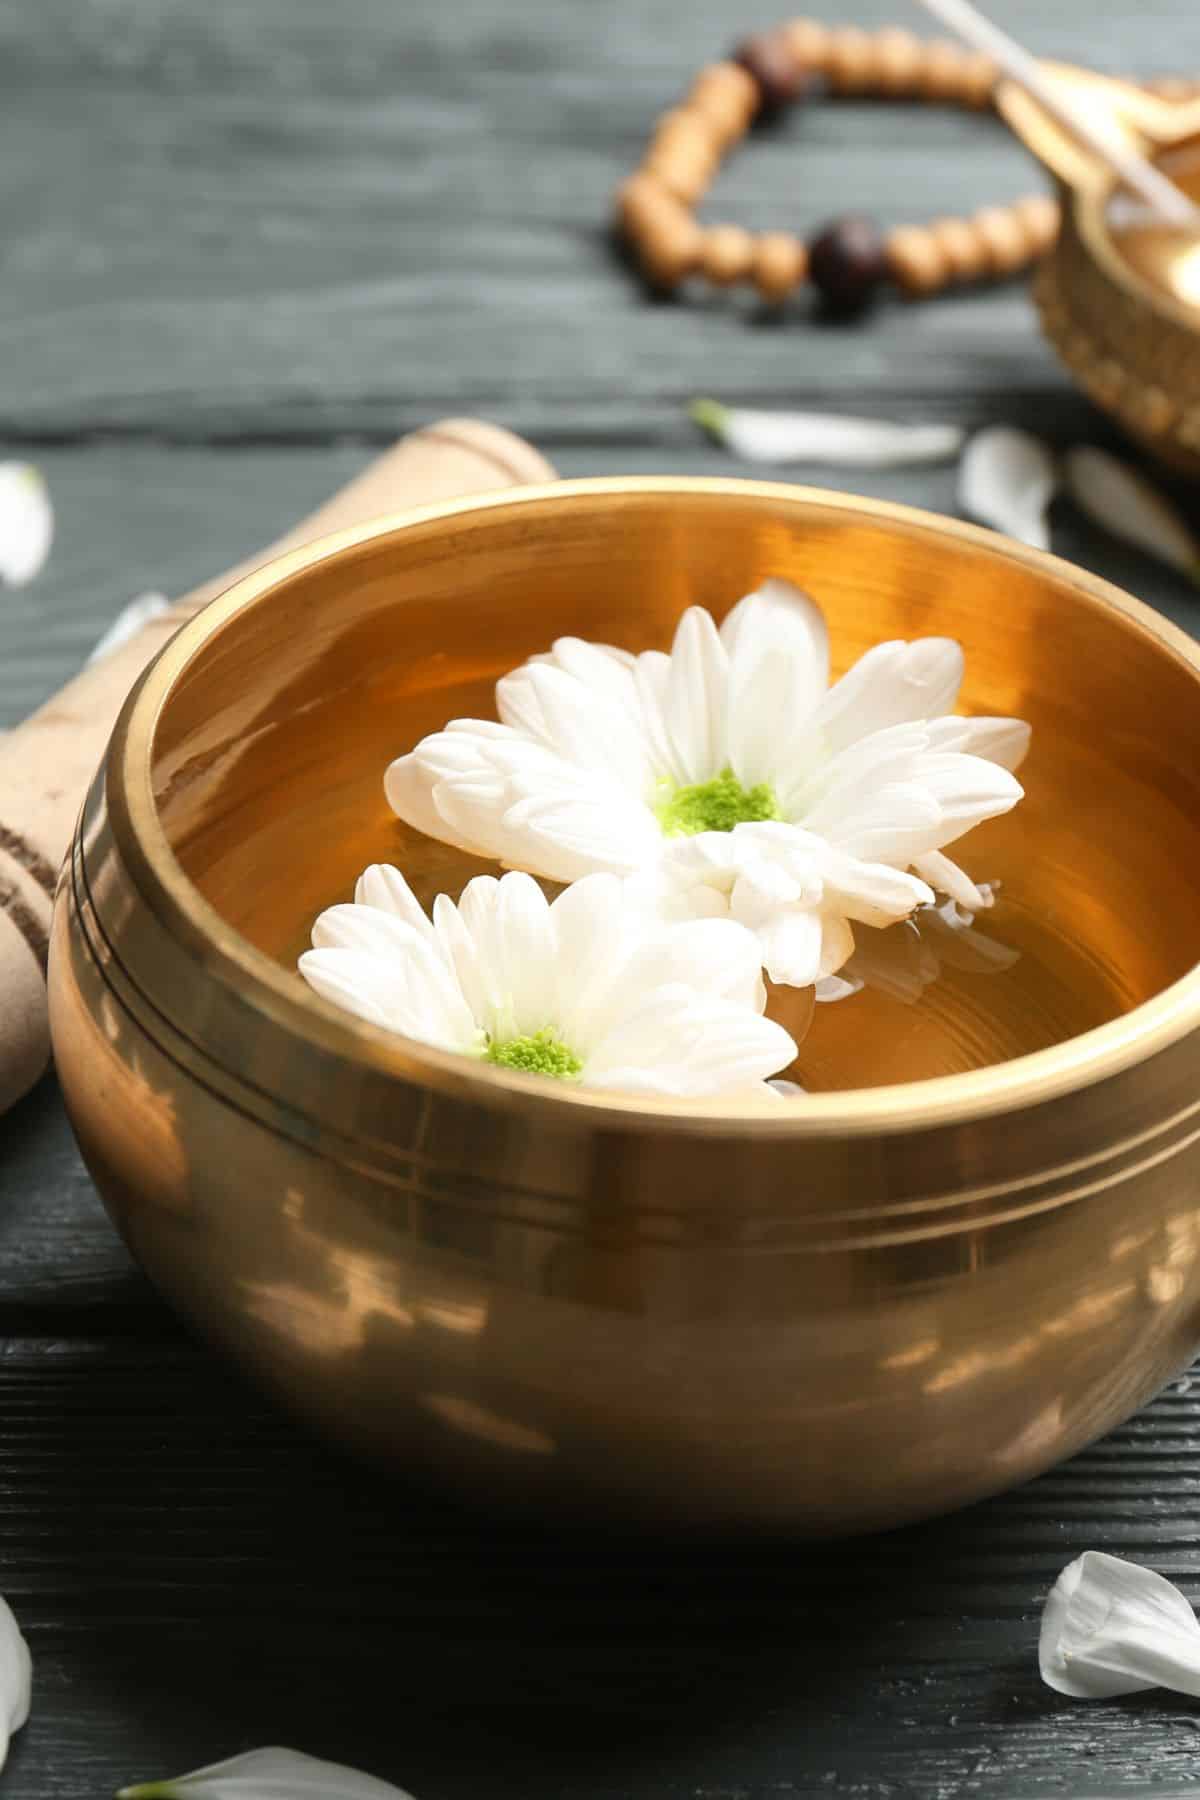 bowl with flowers on table.